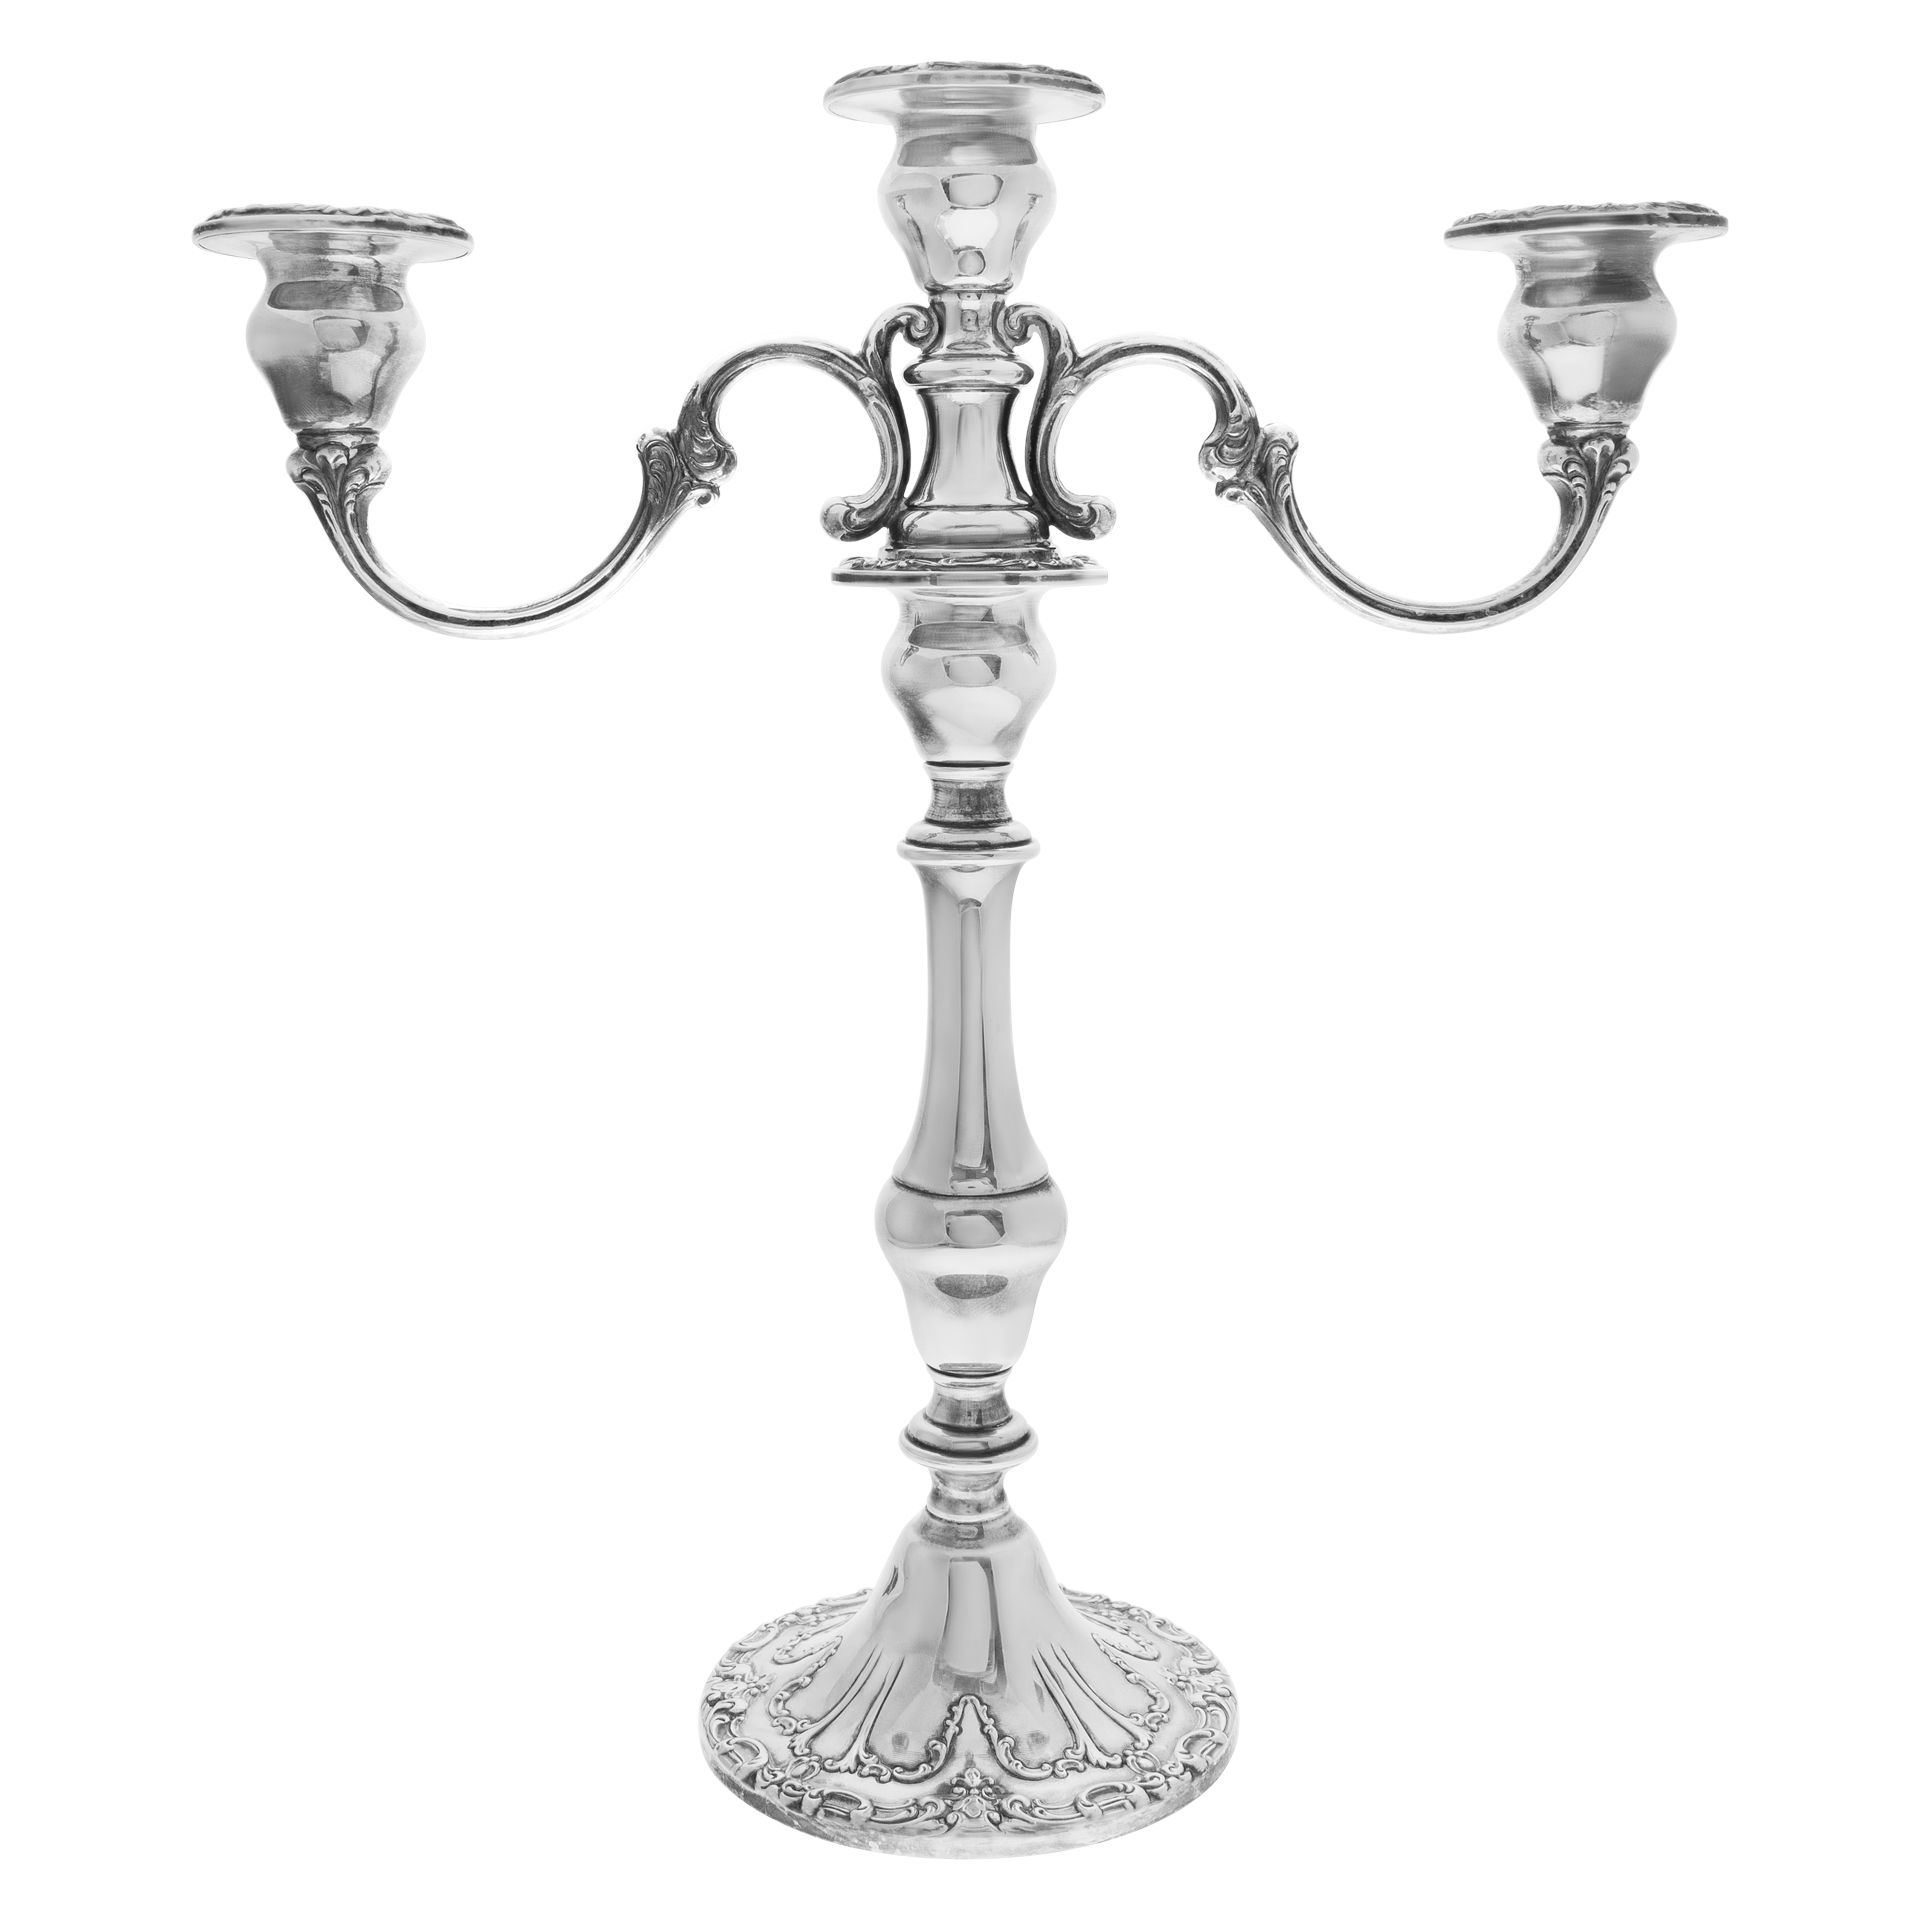 Pair of sterling silver 3 tiers candelabra by Gorham. image 1